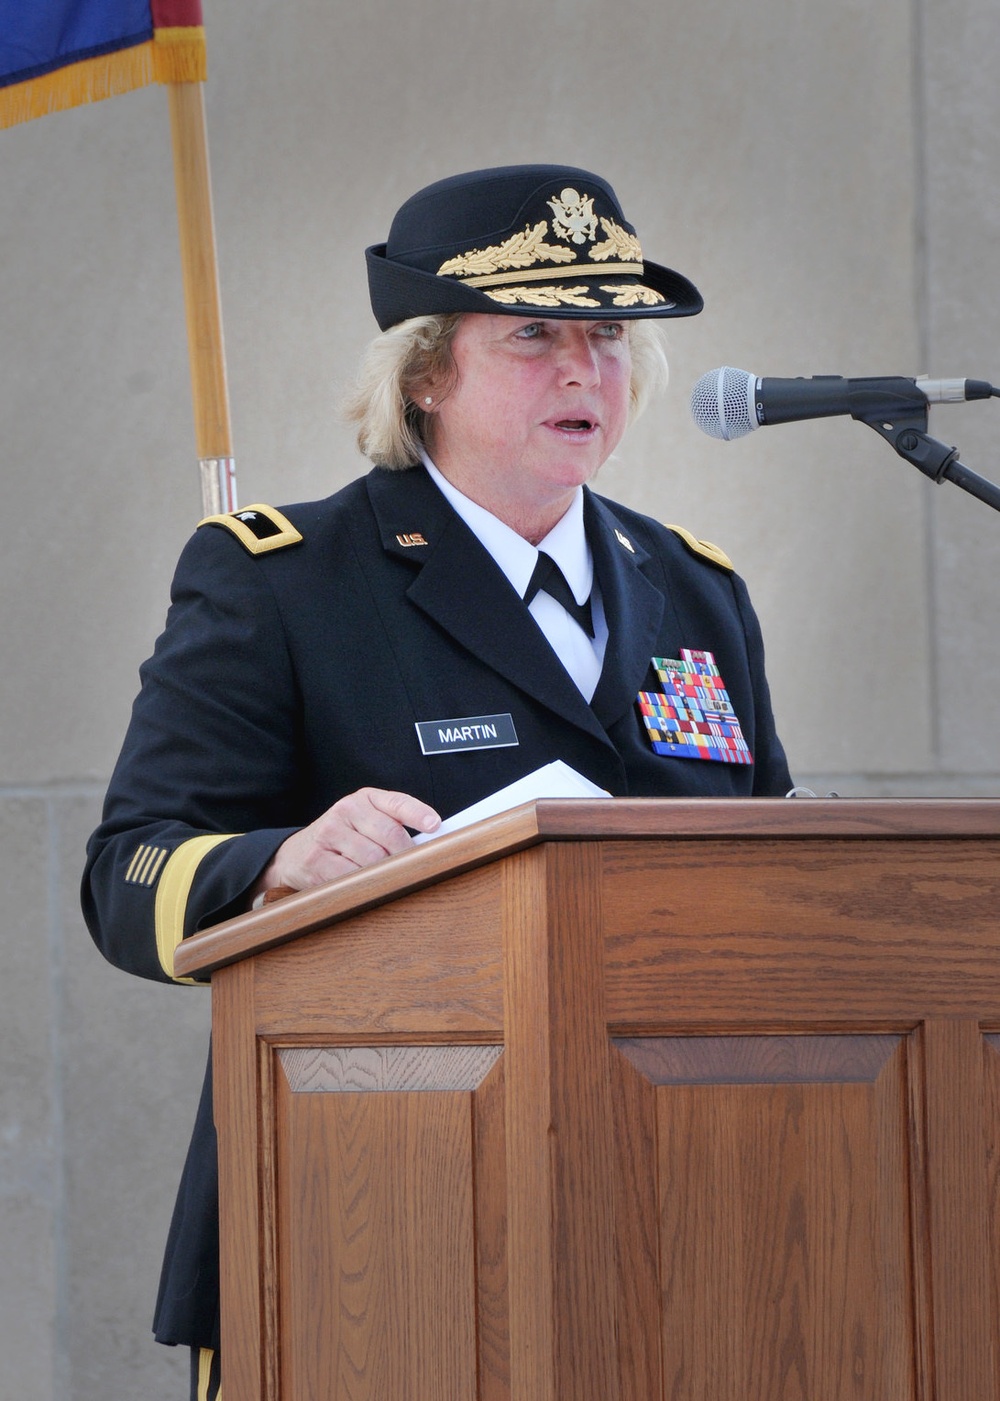 Firefighter promoted to brigadier general in the Missouri Army National Guard